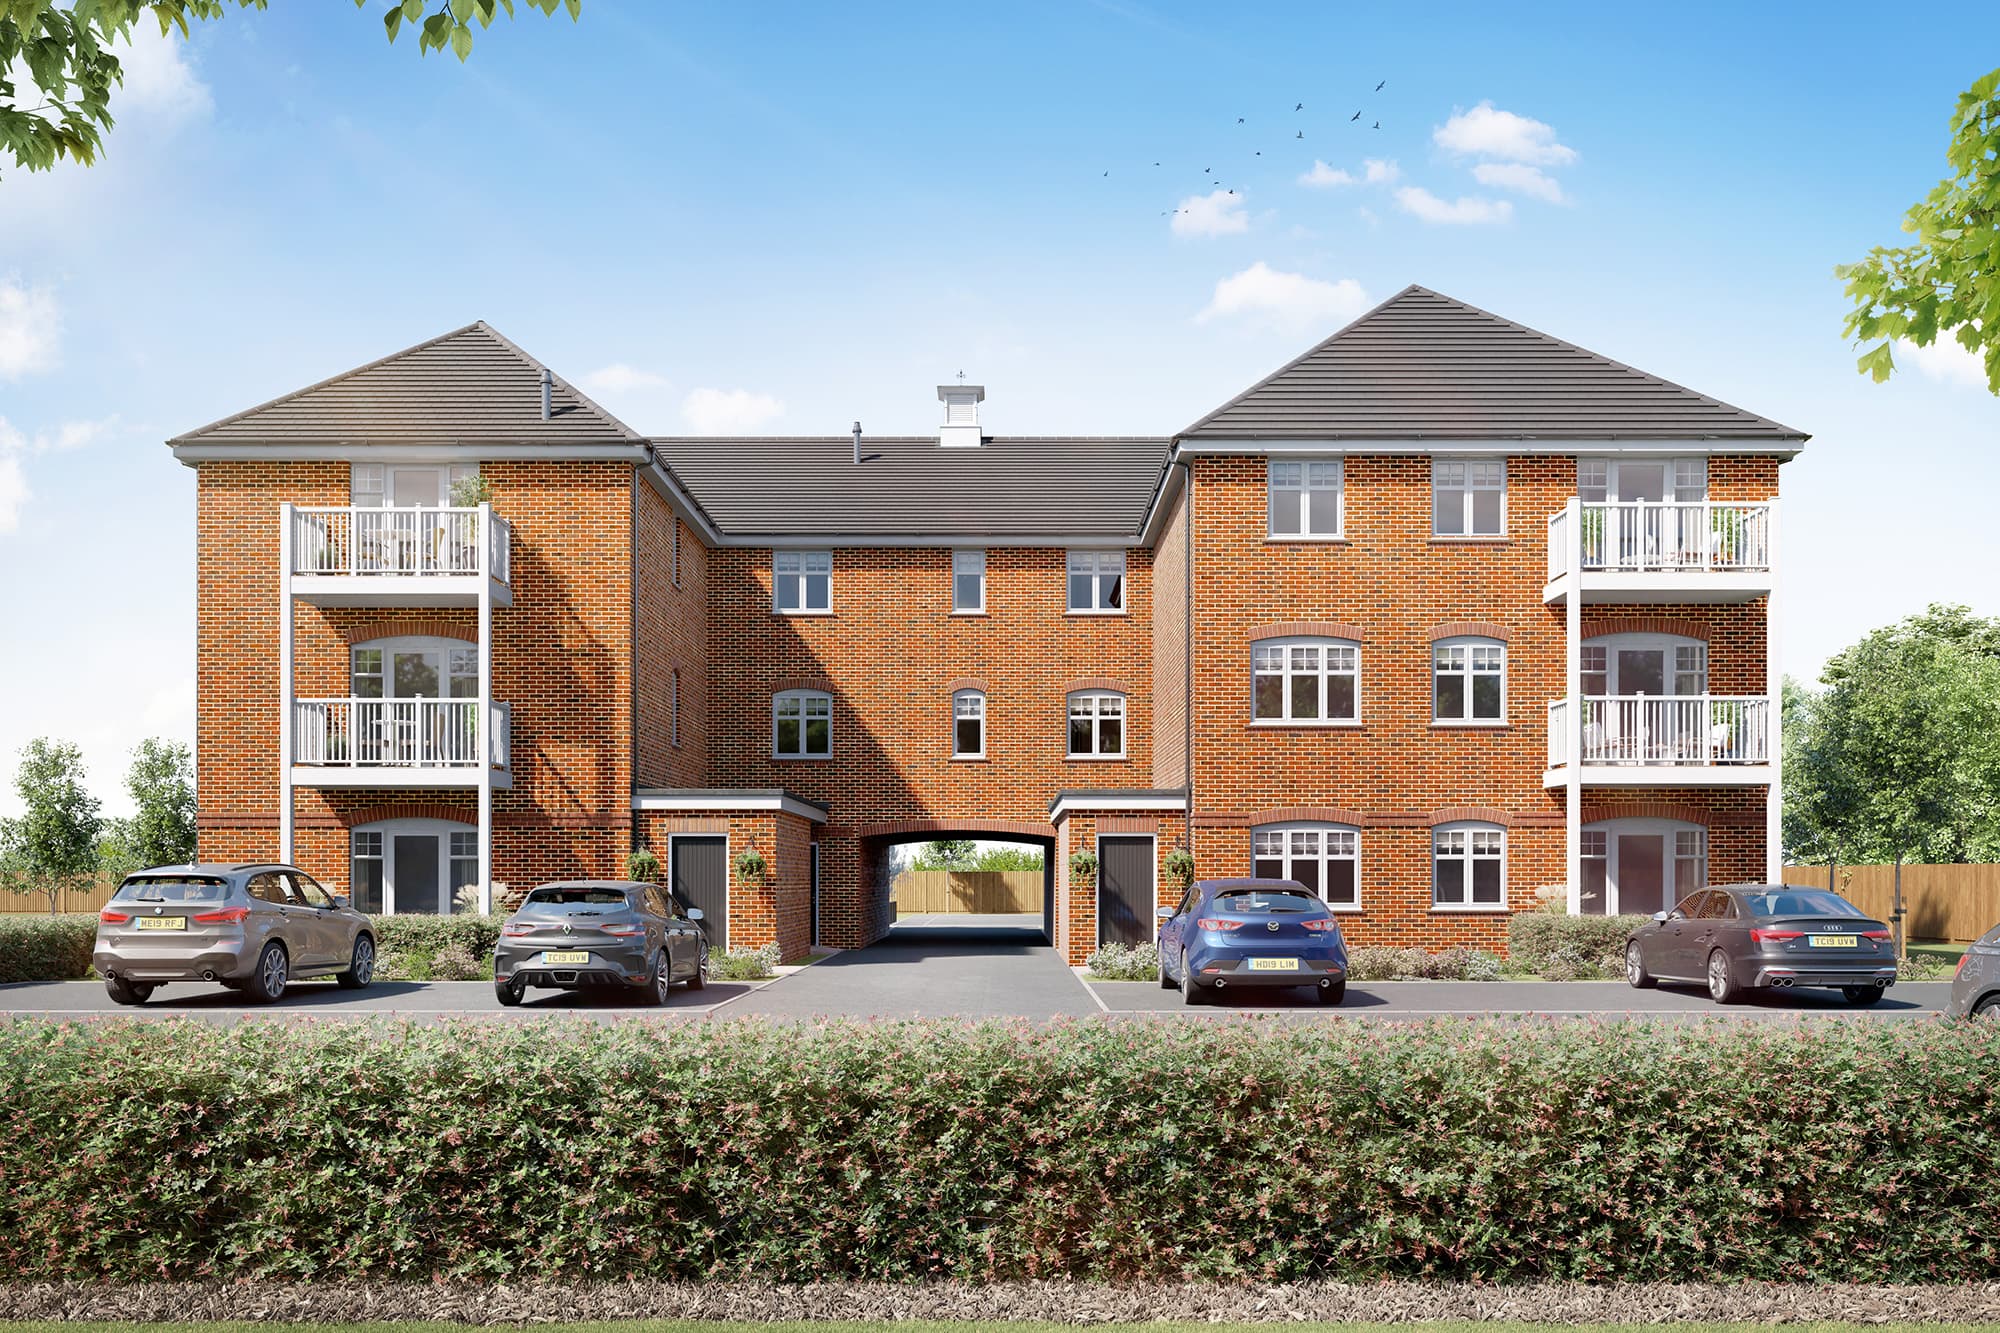 An external CGI image of Sunninghill Square by Abri Homes - available to purchase through Shared Ownership on Share to Buy!